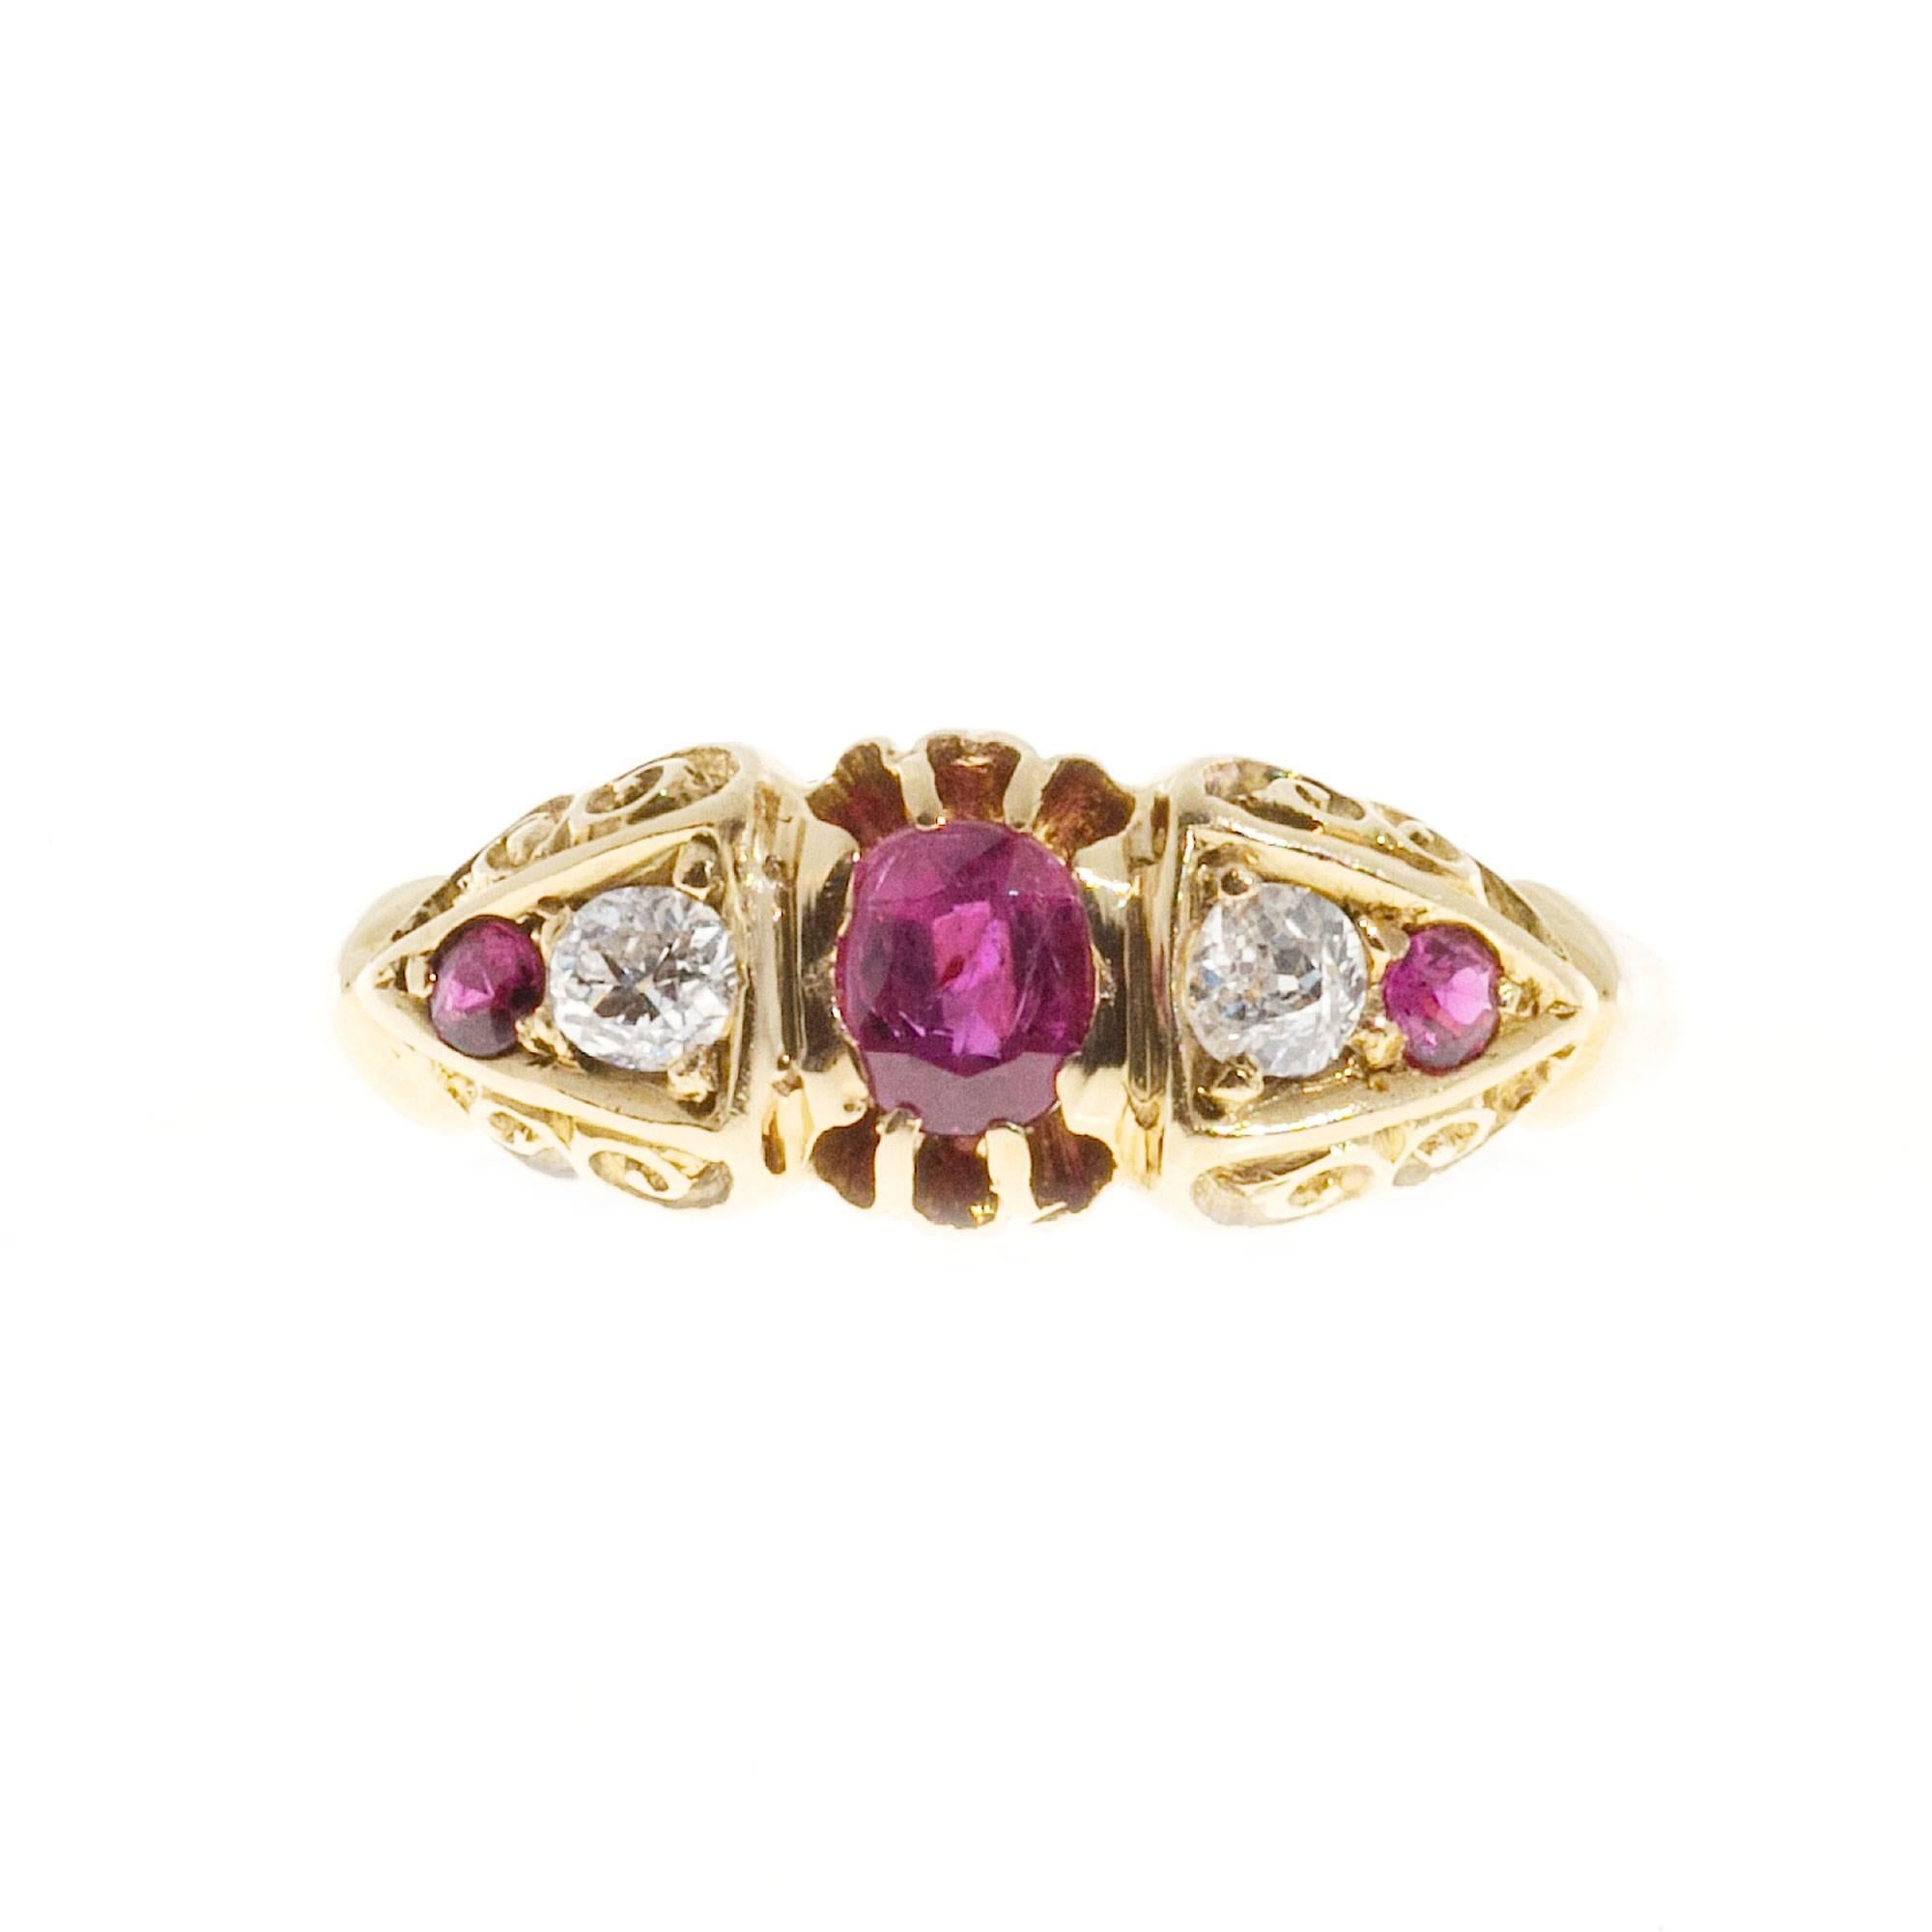 Rare and beautiful late 1800’s 18k yellow gold engagement ring with top gem natural rubies- GIA certified natural and no heat. Two nice old mine cut diamonds. Handmade Victorian ring

1 Oval 4.62 x 3.43 x 2.19mm brilliant cut ruby SI Approx.  .30ct